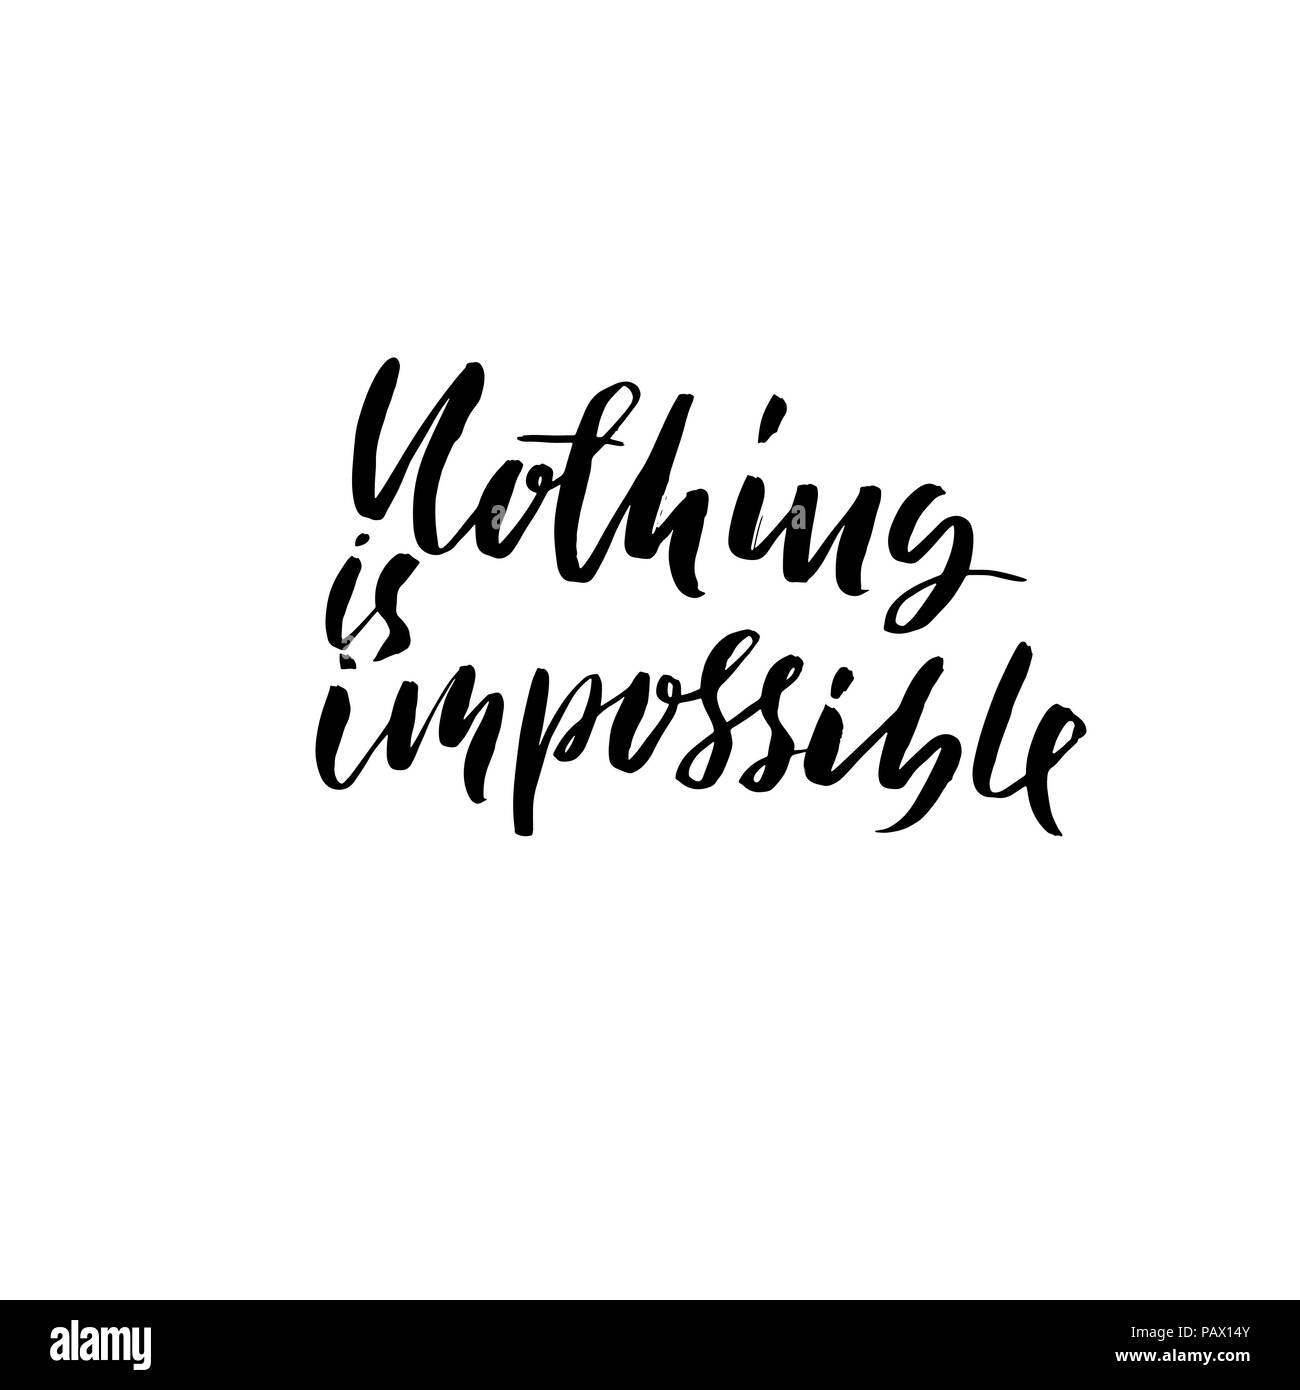 Nothing is impossible. Hand drawn dry brush lettering. Ink illustration. Modern calligraphy phrase. Vector illustration. Stock Vector